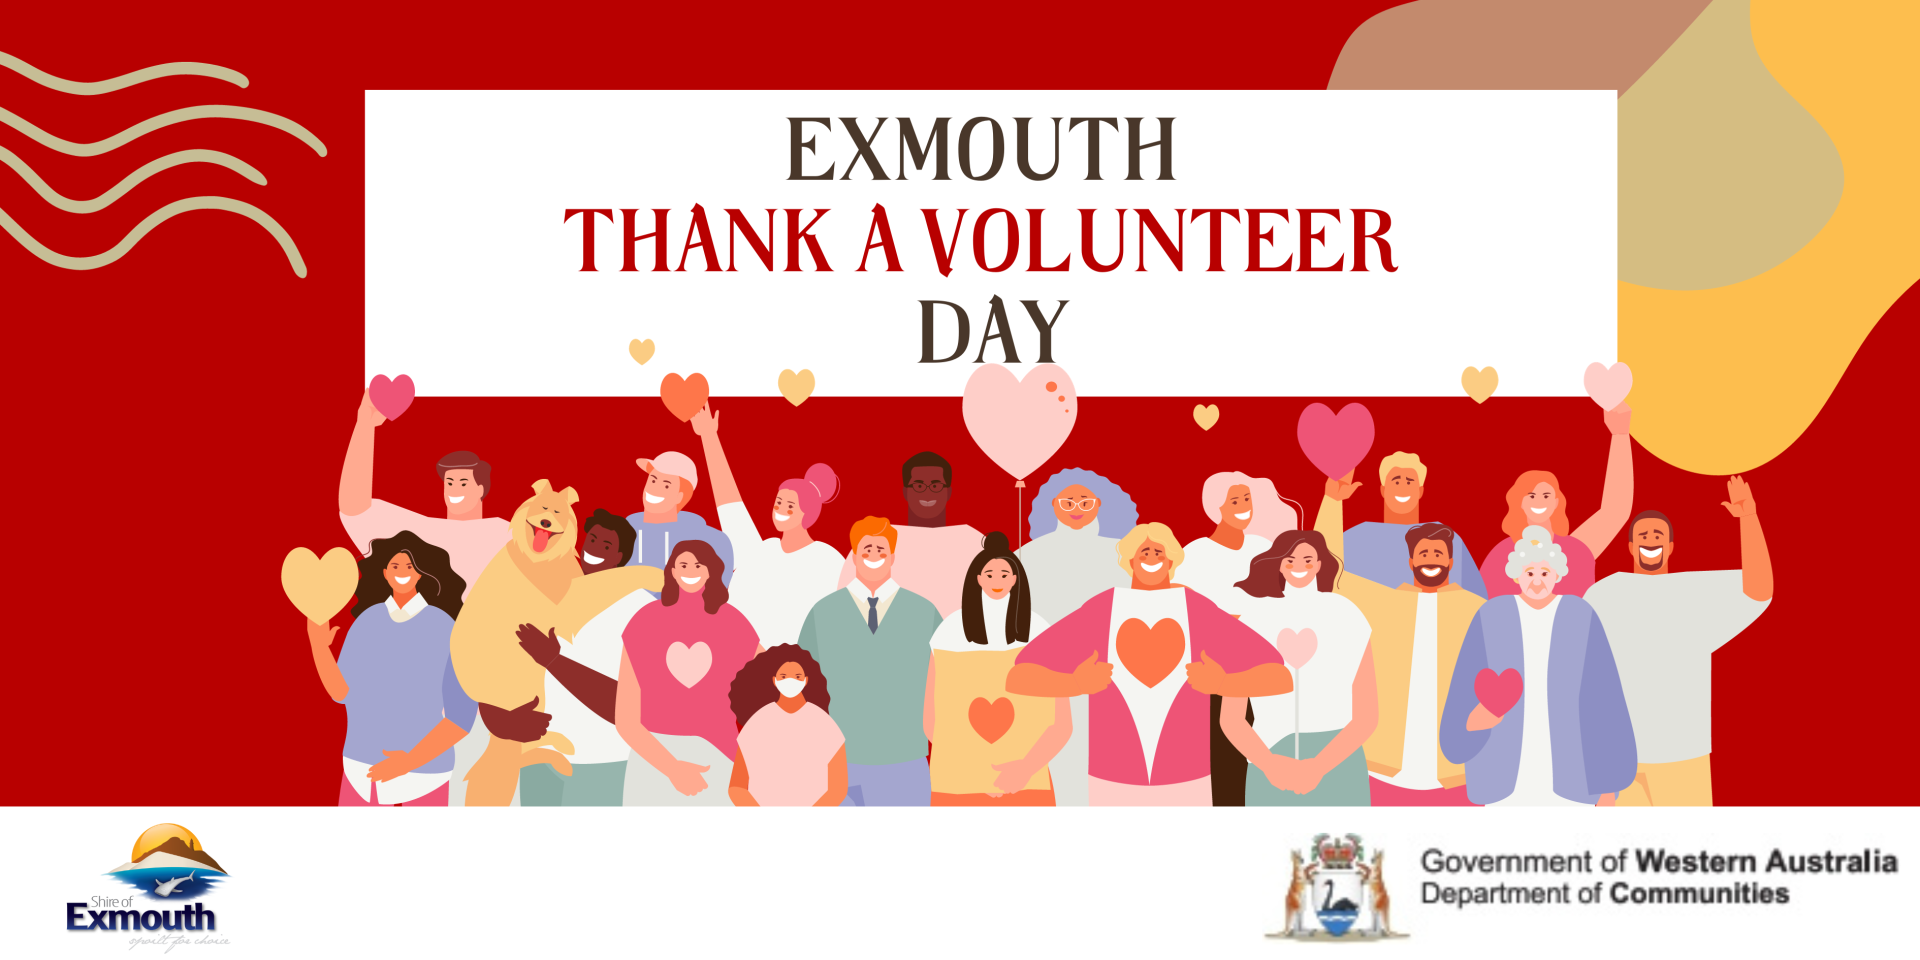 Shire of Exmouth show its gratitude on International Thank a Volunteer Day